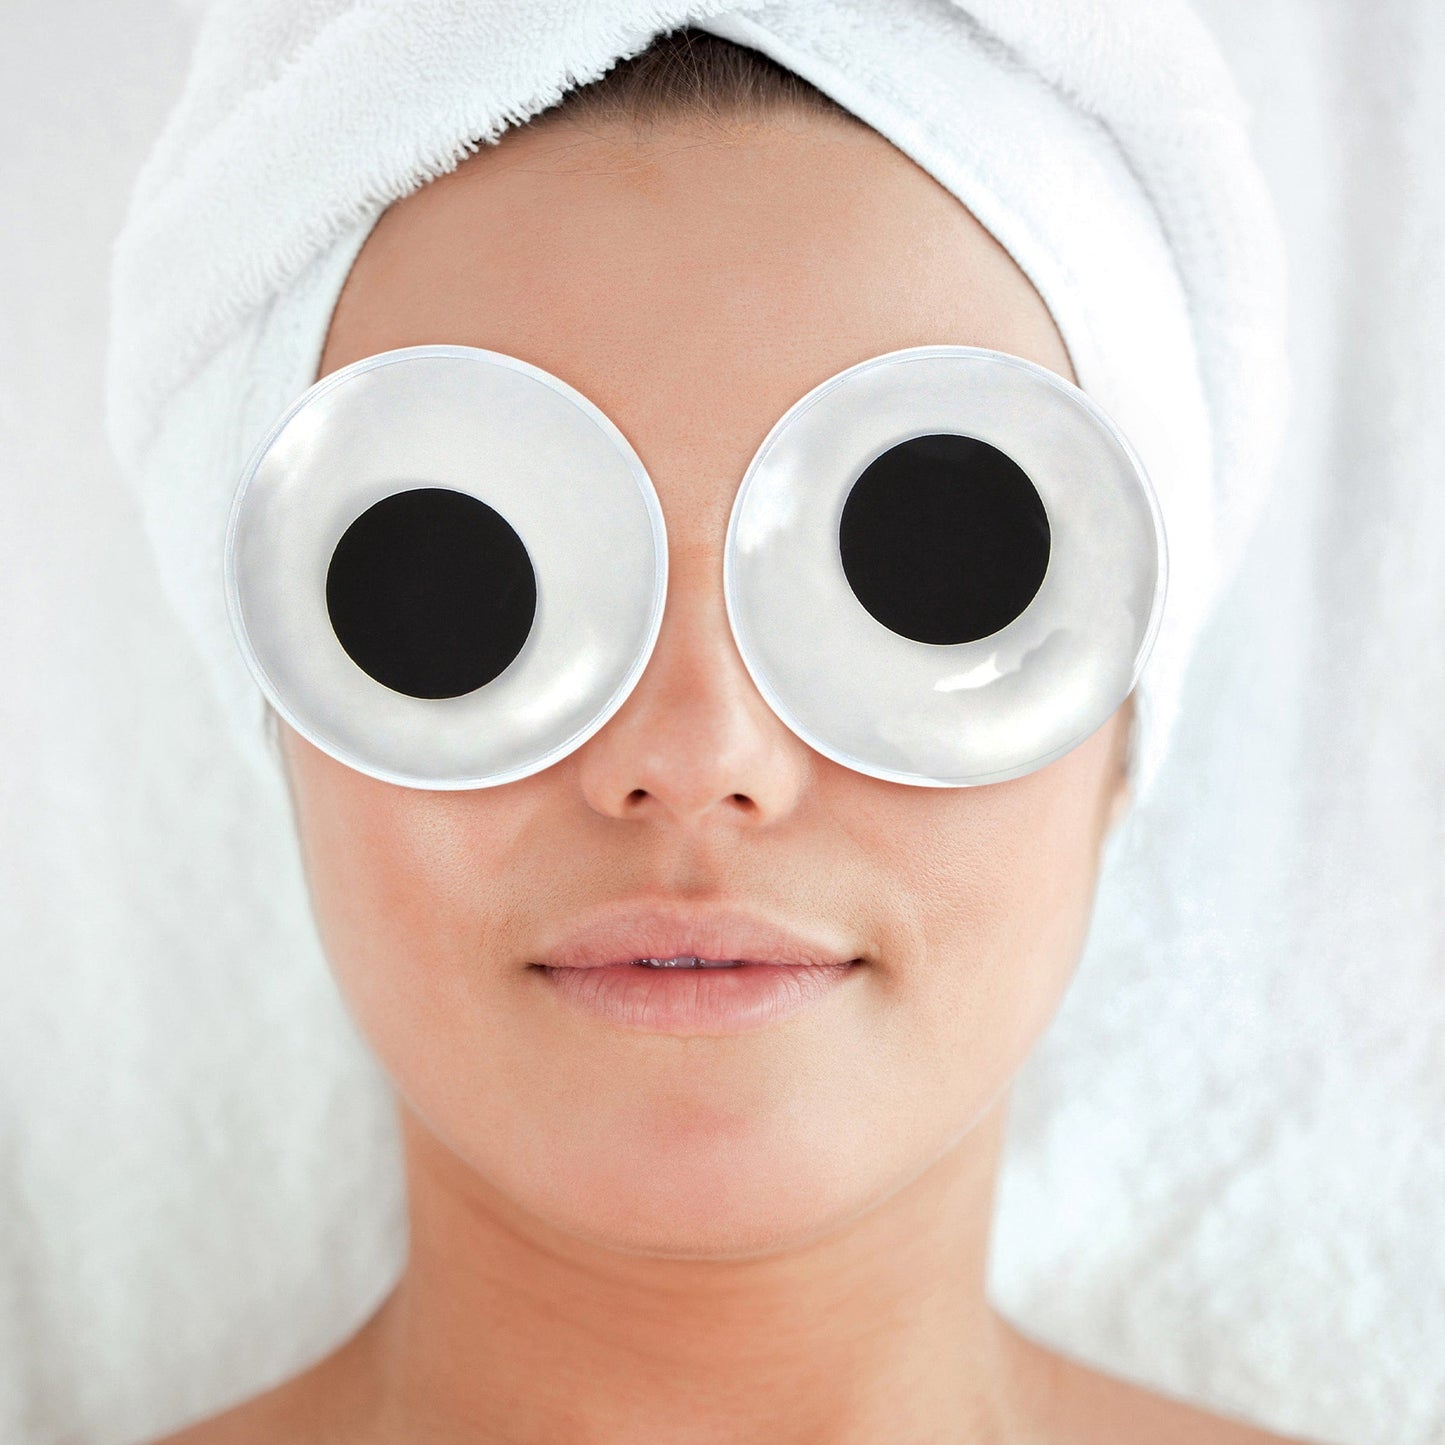 eye pads in the shape giant google eyes laying on a face with hair wrapped in towel